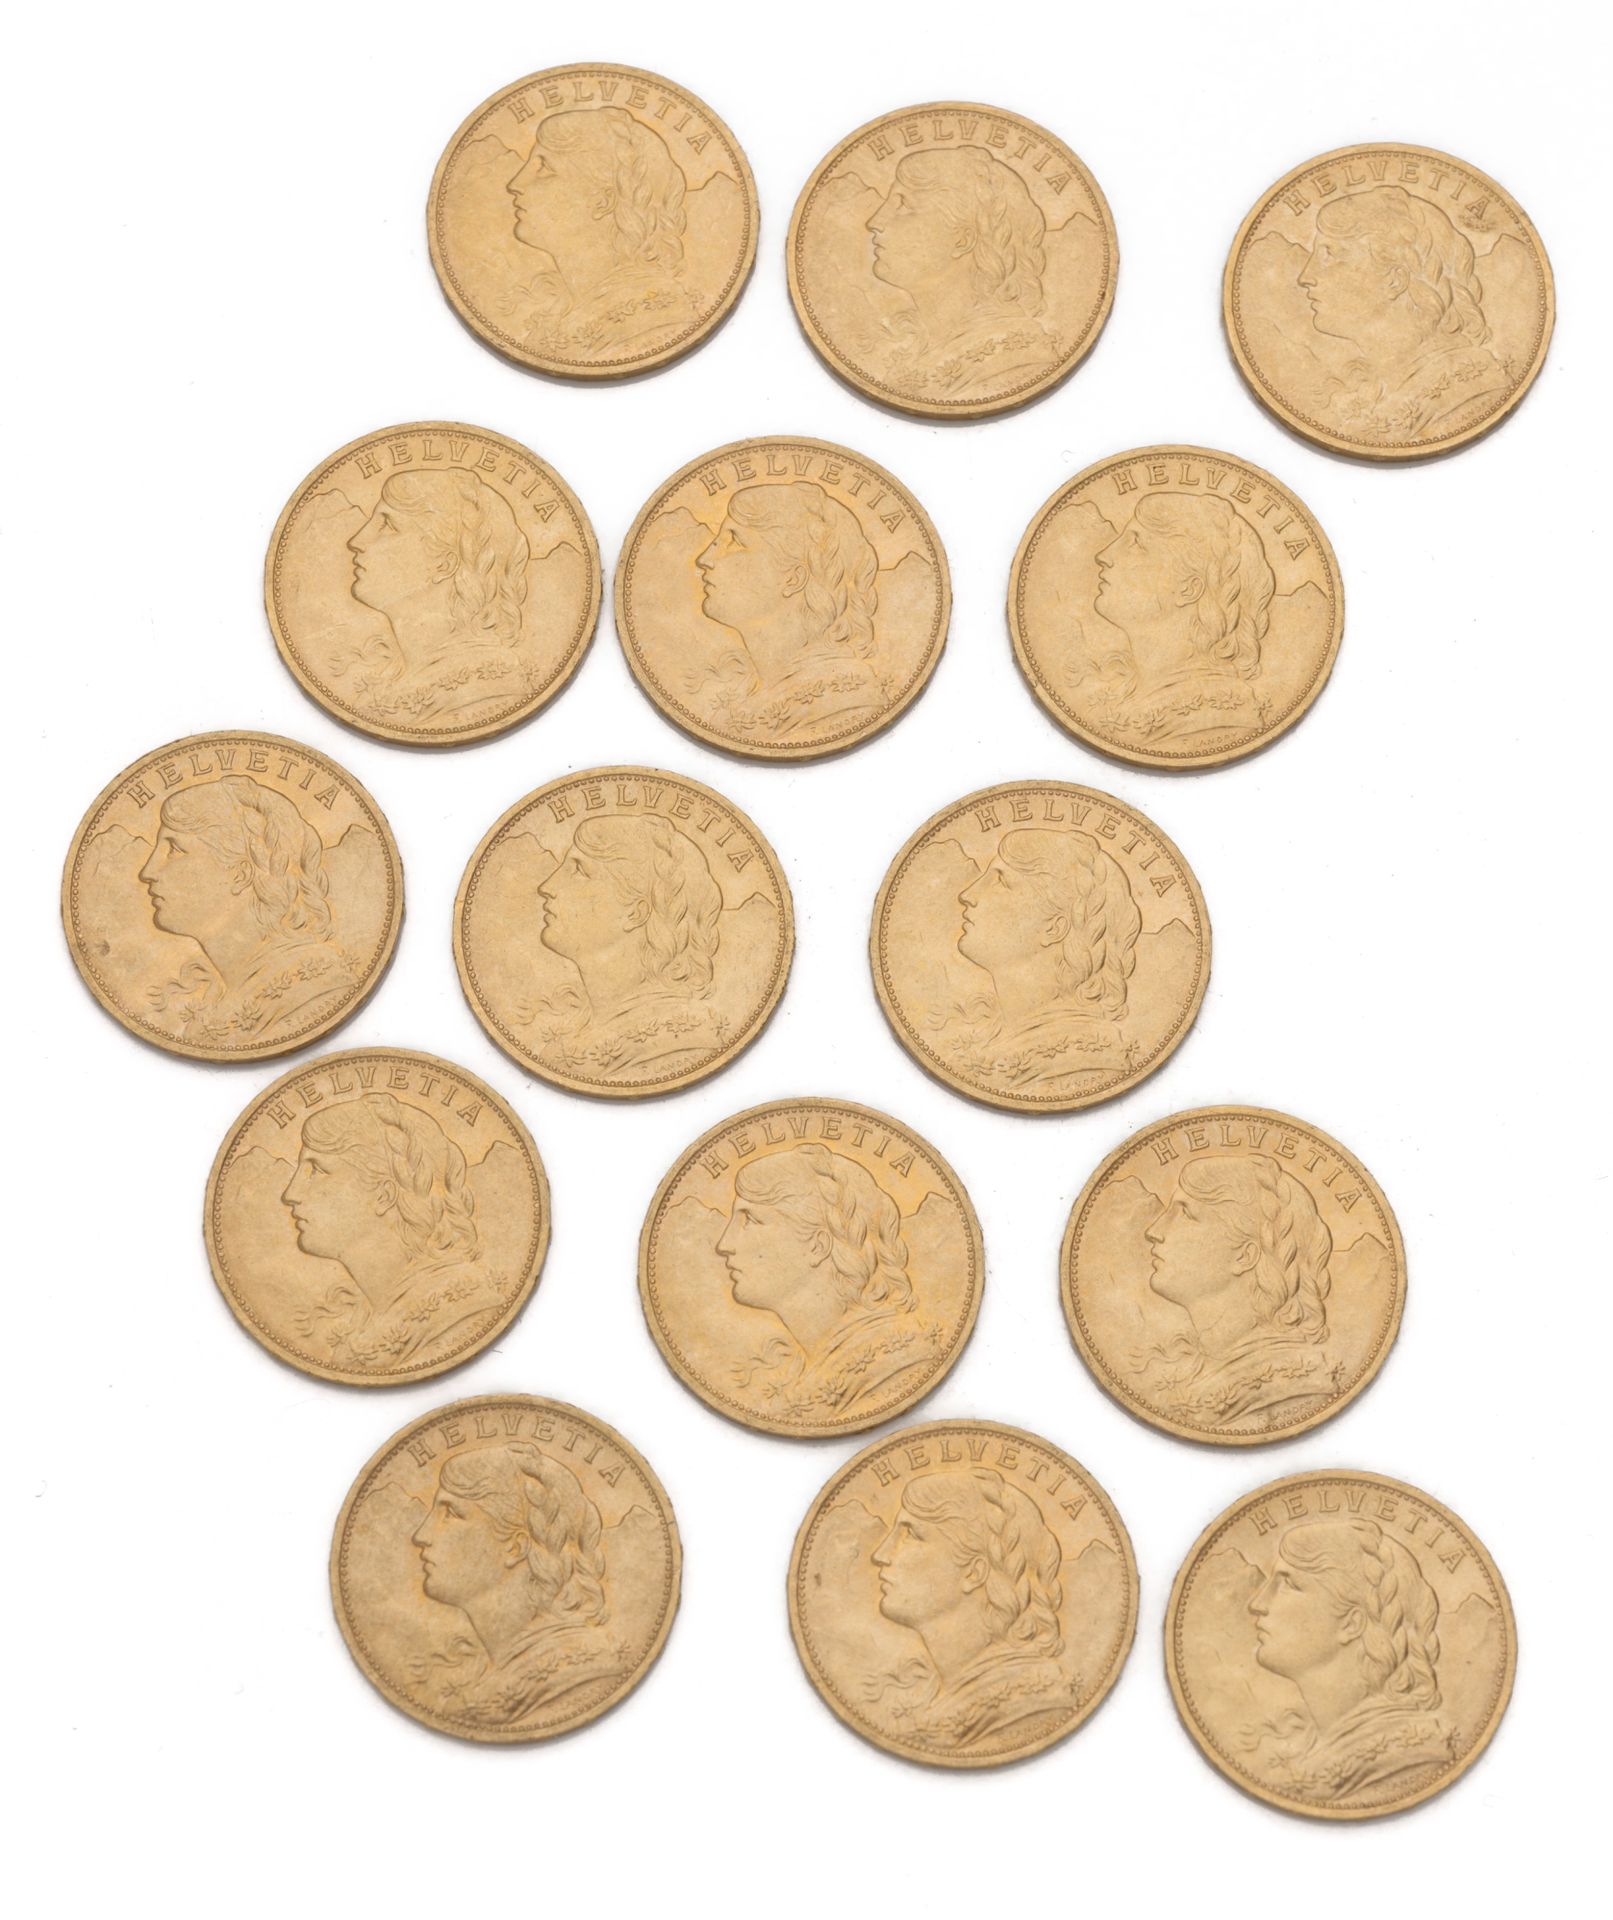 Null SUISSE
20 Lire or, Helvetia. 15 exemplaires. 1922
Poids : 96,76 g